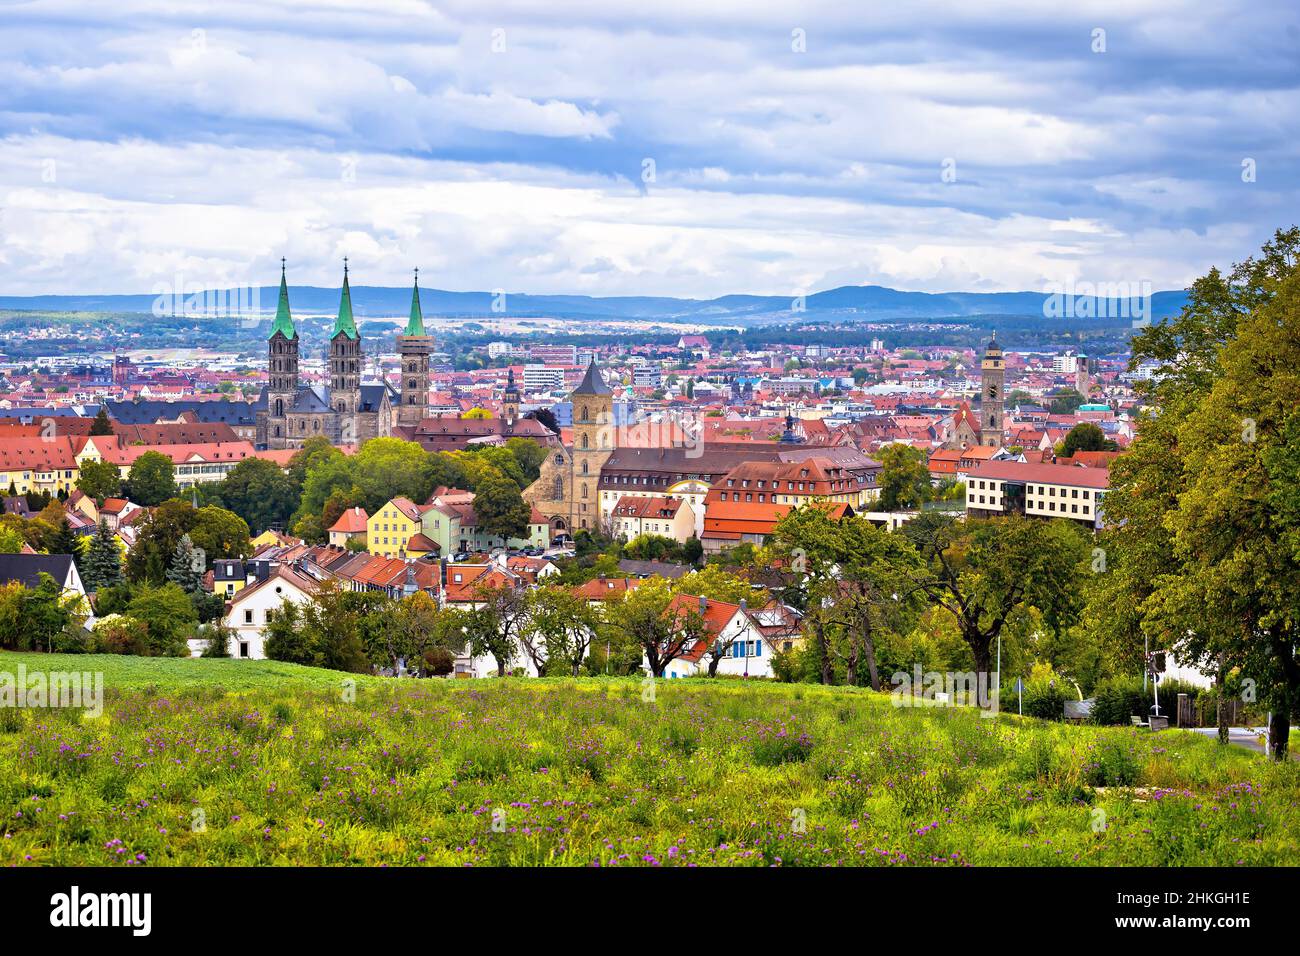 Bamberg. Town of Bamberg panoramic view from hill, Upper Franconia, Bavaria region of Germany Stock Photo